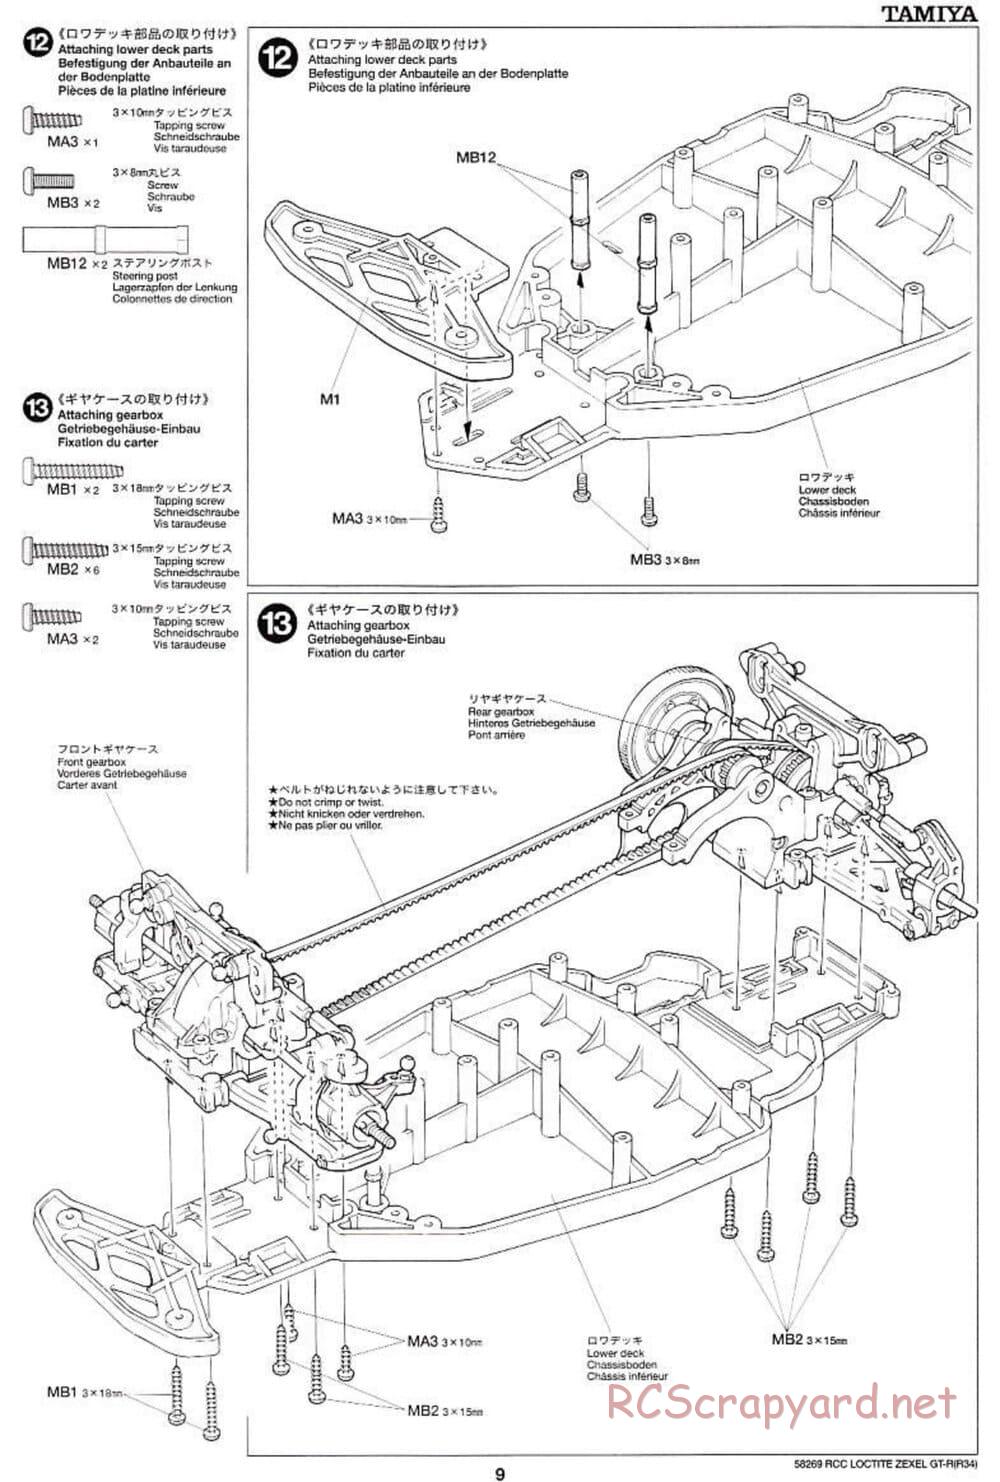 Tamiya - Loctite Zexel Skyline GT-R (R34) - TA-04 Chassis - Manual - Page 9